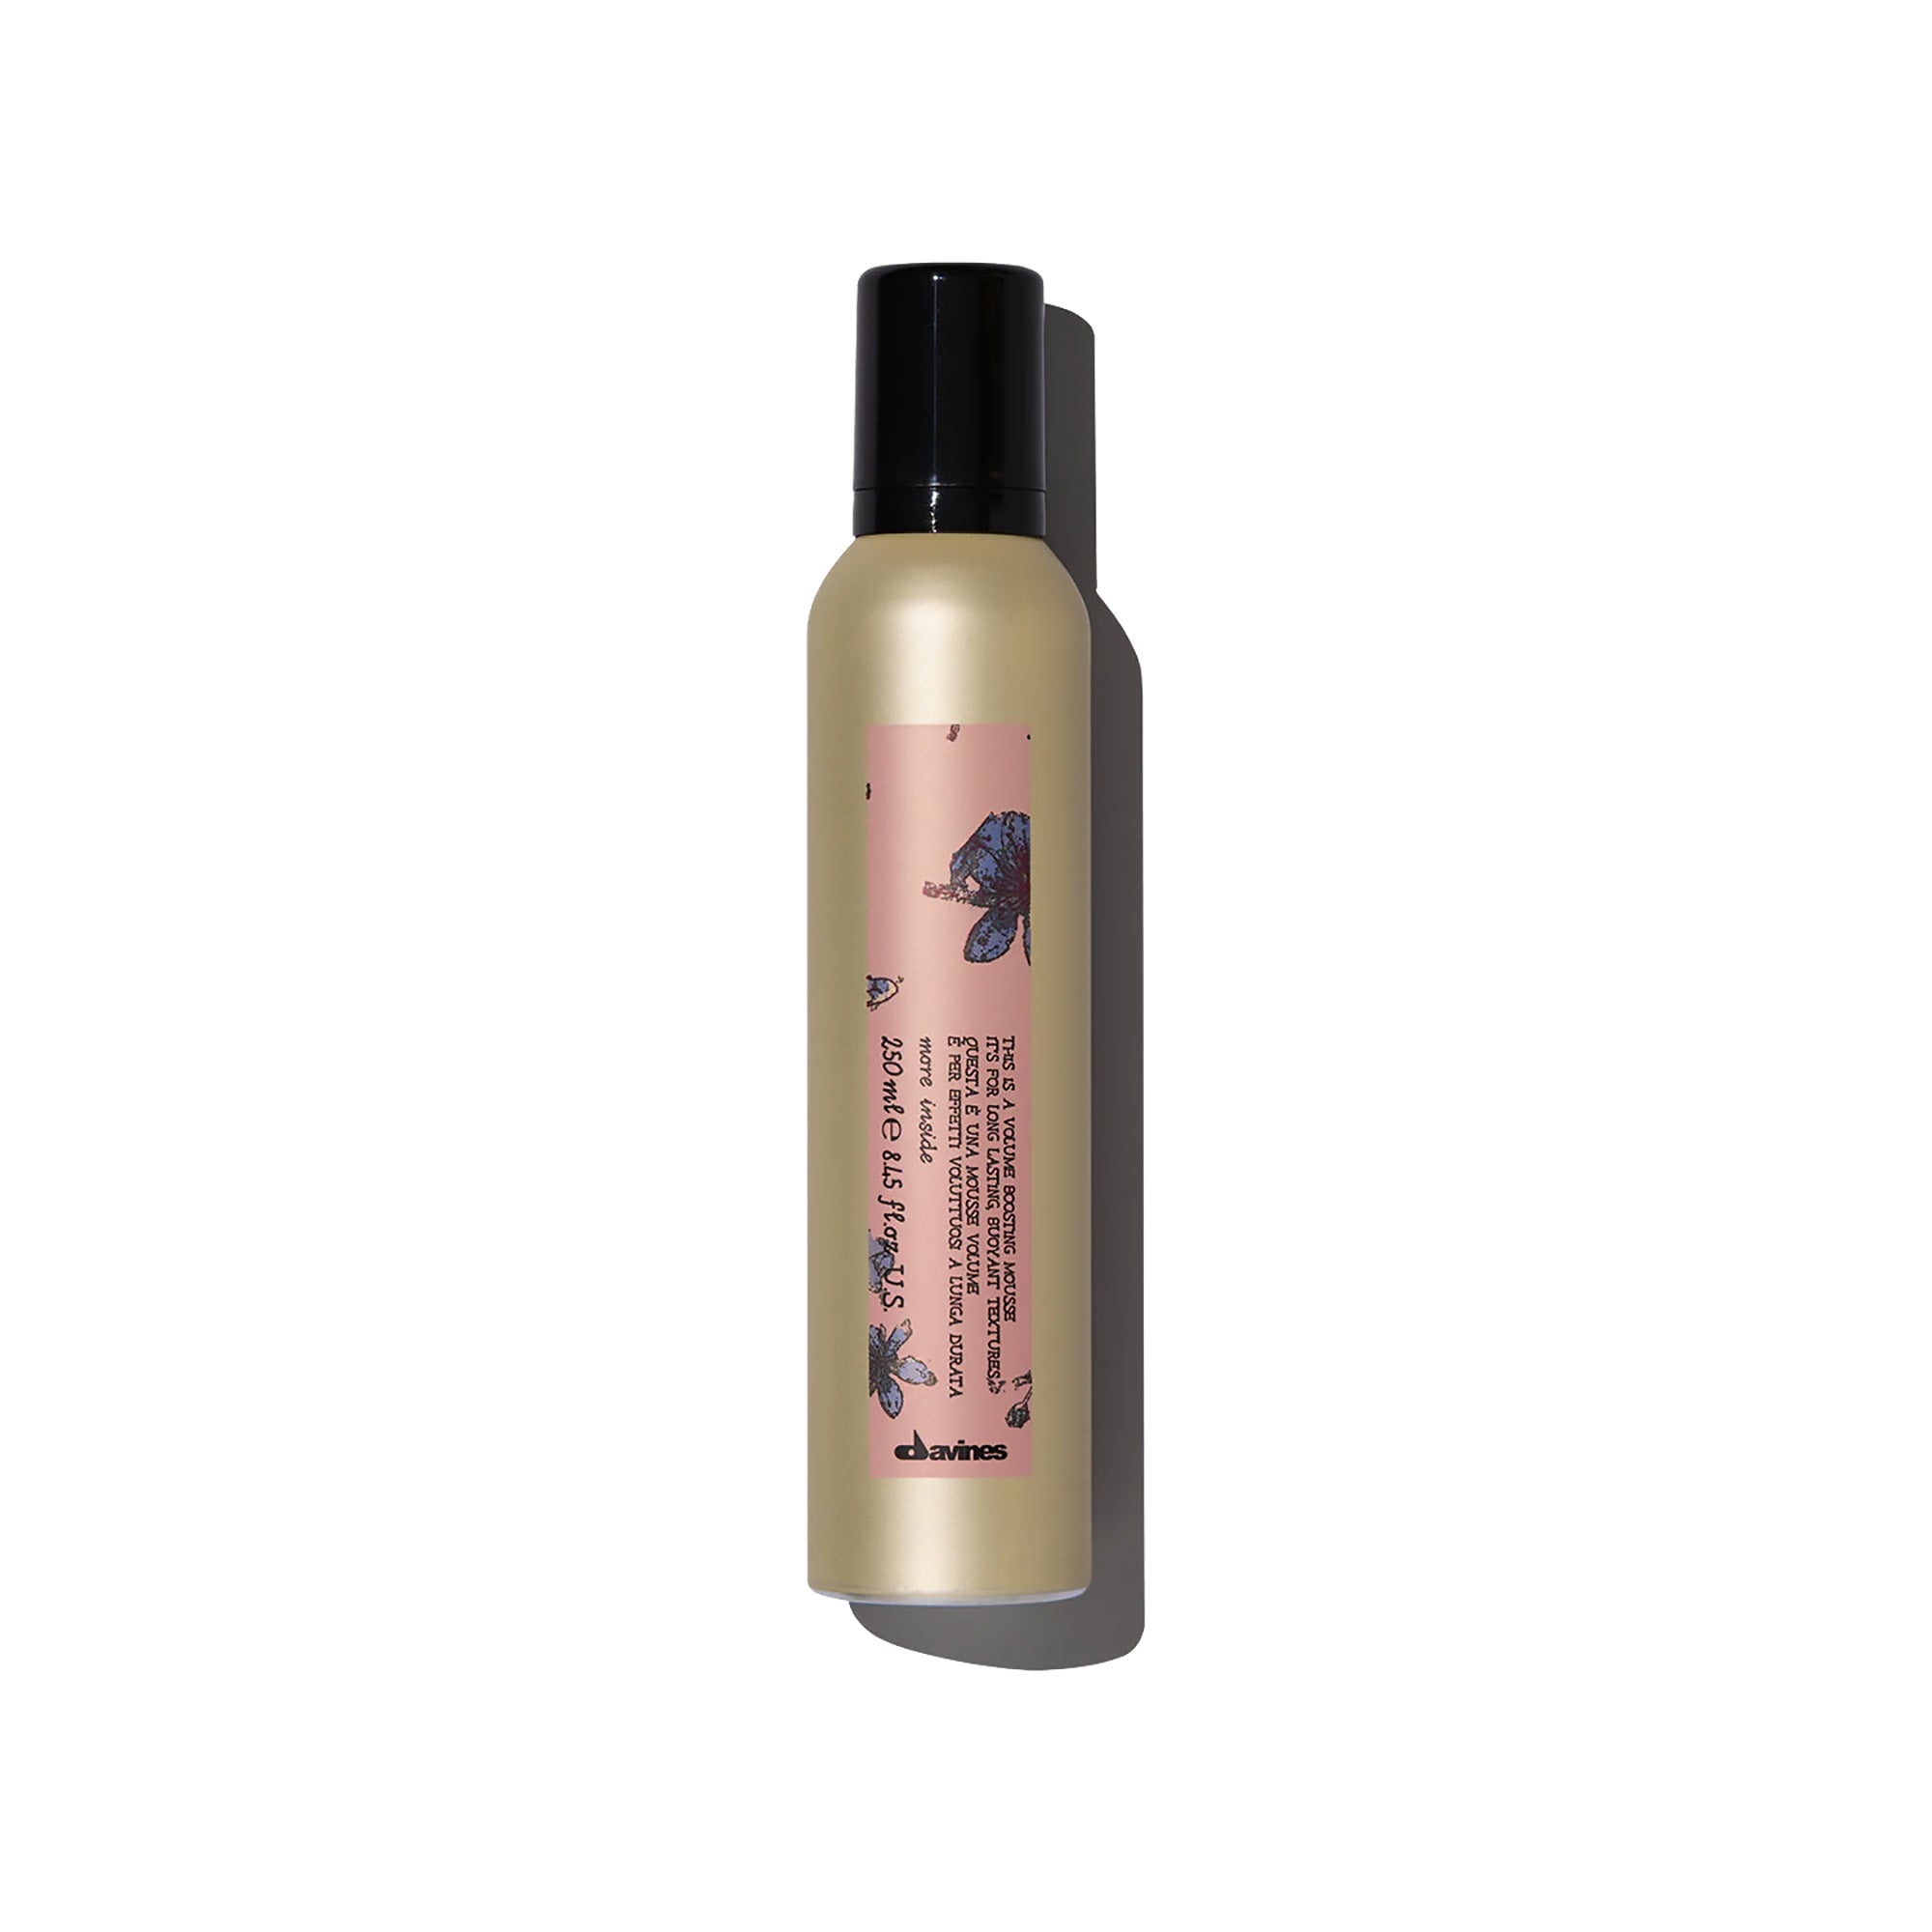 Davines This Is A Volume Boosting Mousse / 8.5OZ